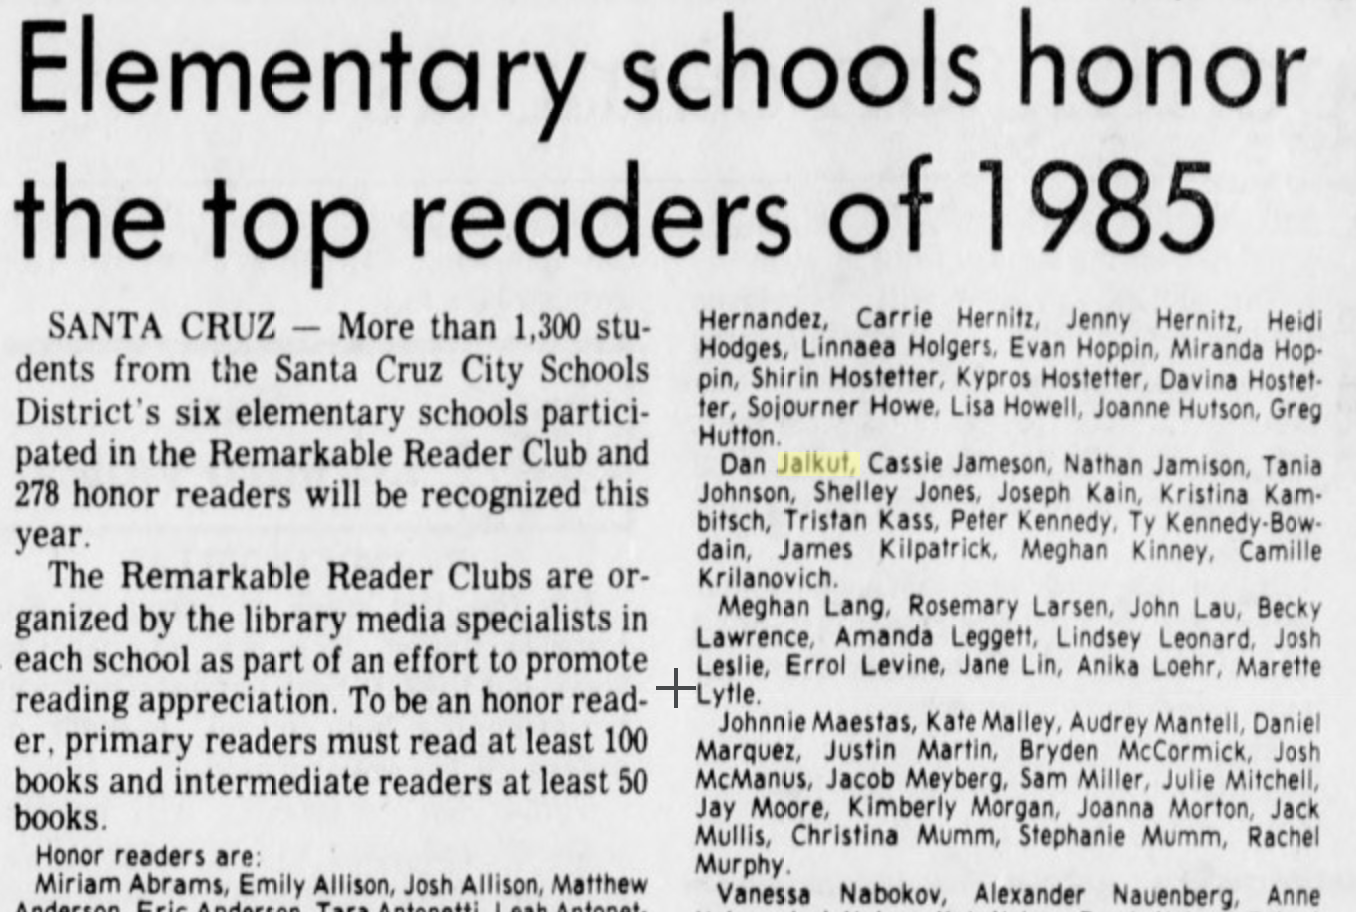 Screenshot of a newspaper article from 1985 listing elementary school students who had received honors as “top readers”, including “Dan Jalkut”